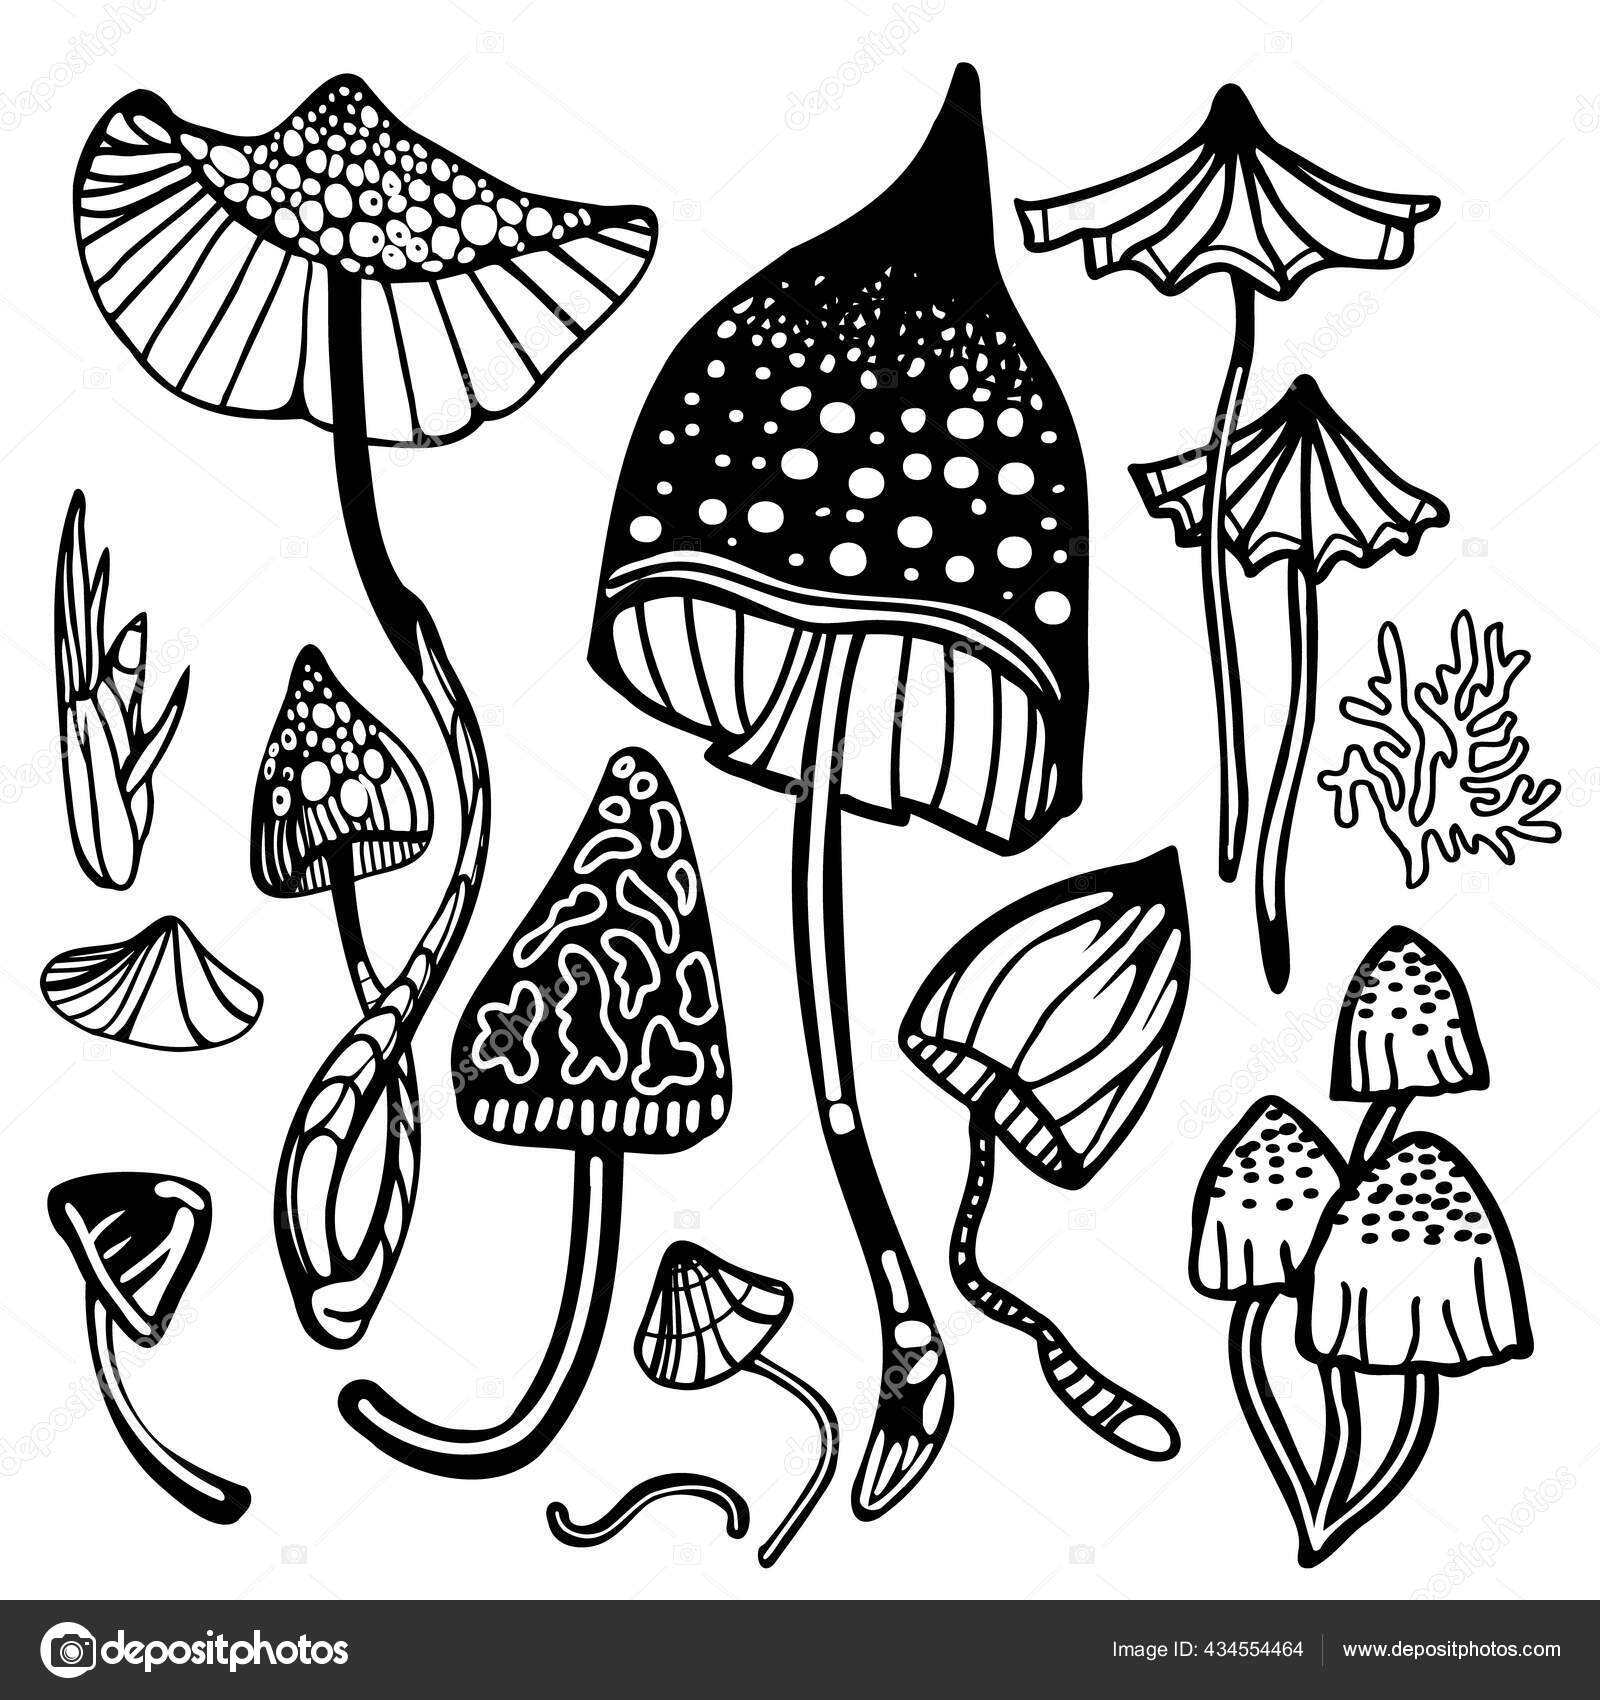 set of magic psychedelic mushrooms coloring page hallucinogenic fantazy mushrooms black and white isolated vector illustration stock vector image by c audramm 434554464